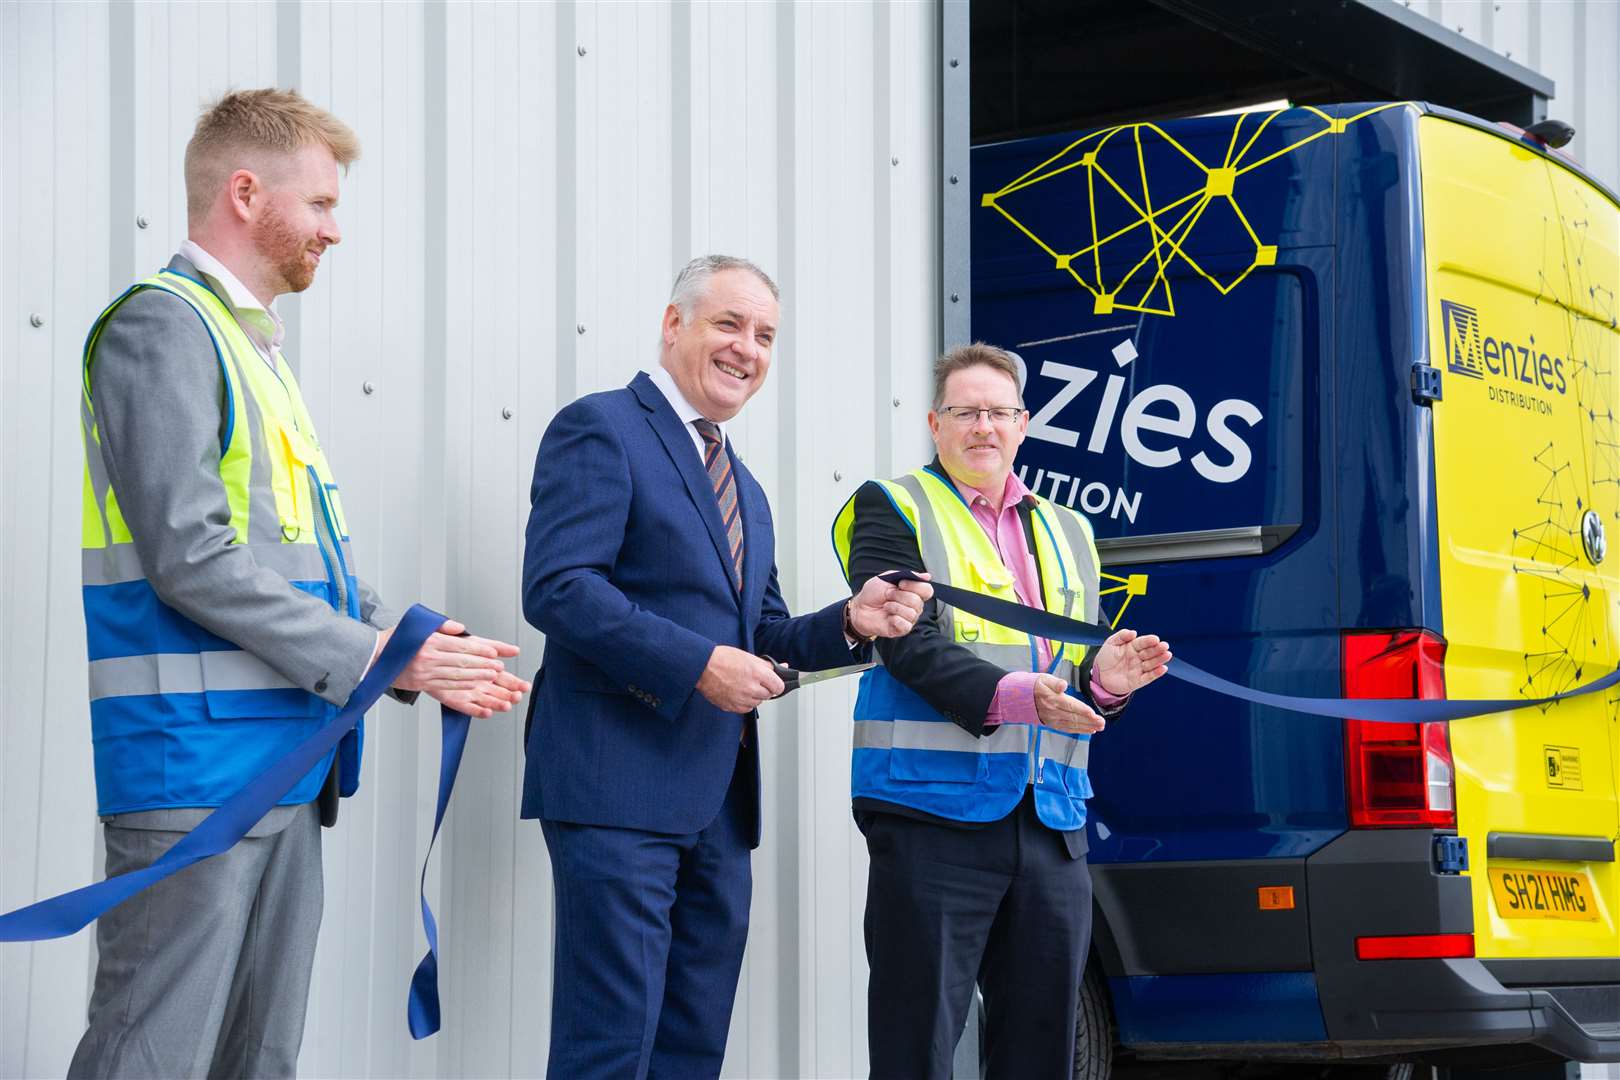 Moray MSP Richard Lochhead is joined by Menzies operations manager Stephen Cameron (left) and parcels operations director Stephen Mooney (right) for the ribbon-cutting ceremony to open Menzies Distribution centre in Elgin. Picture: Daniel Forsyth.